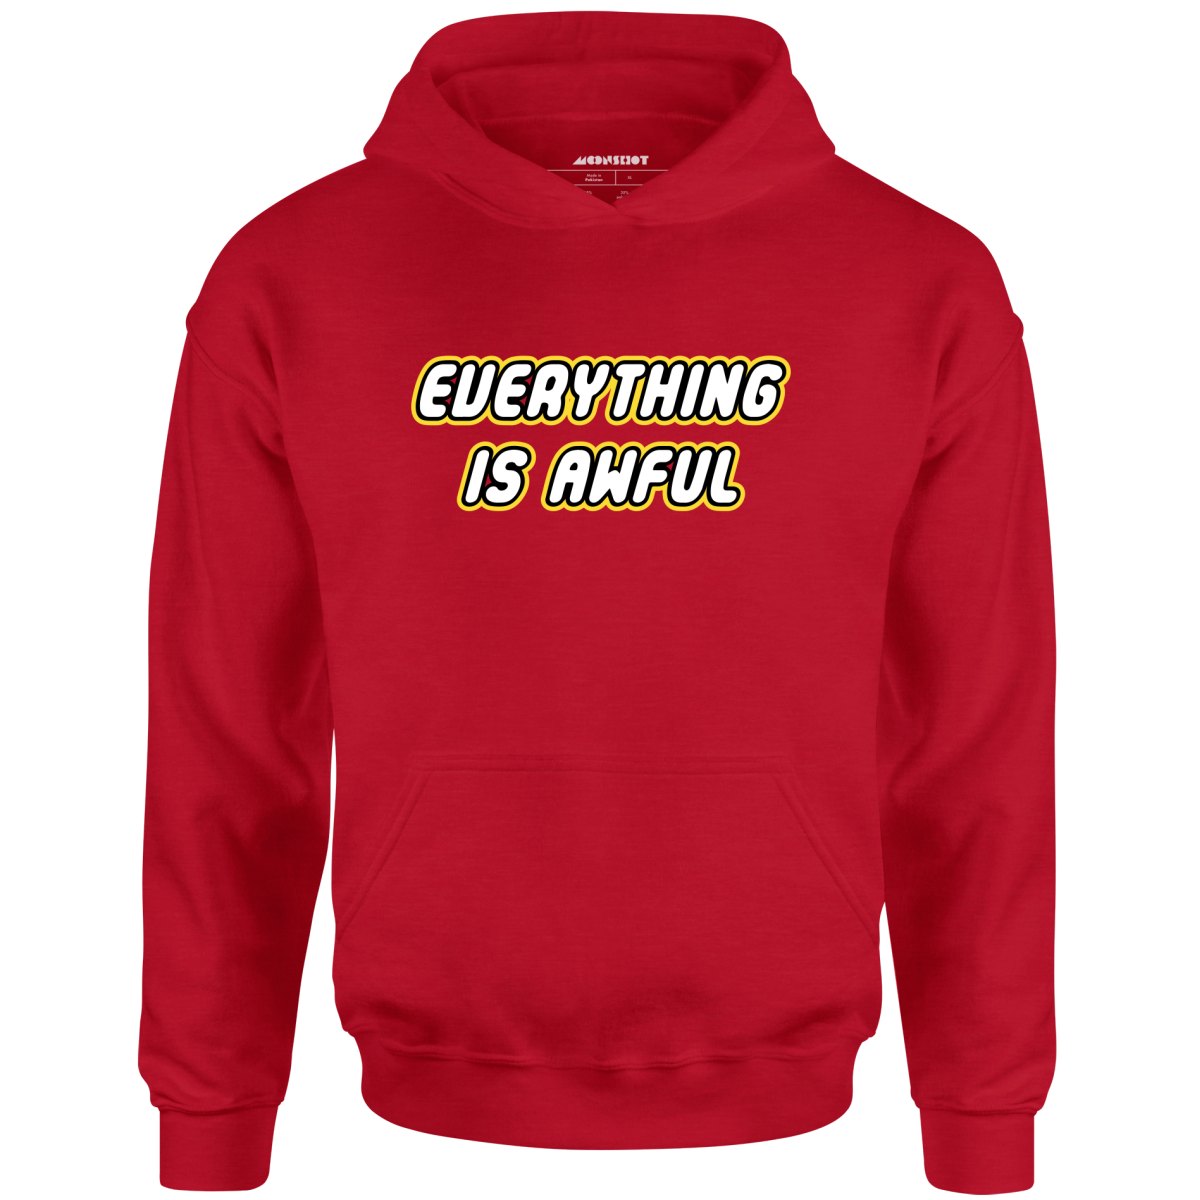 Everything is Awful - Unisex Hoodie